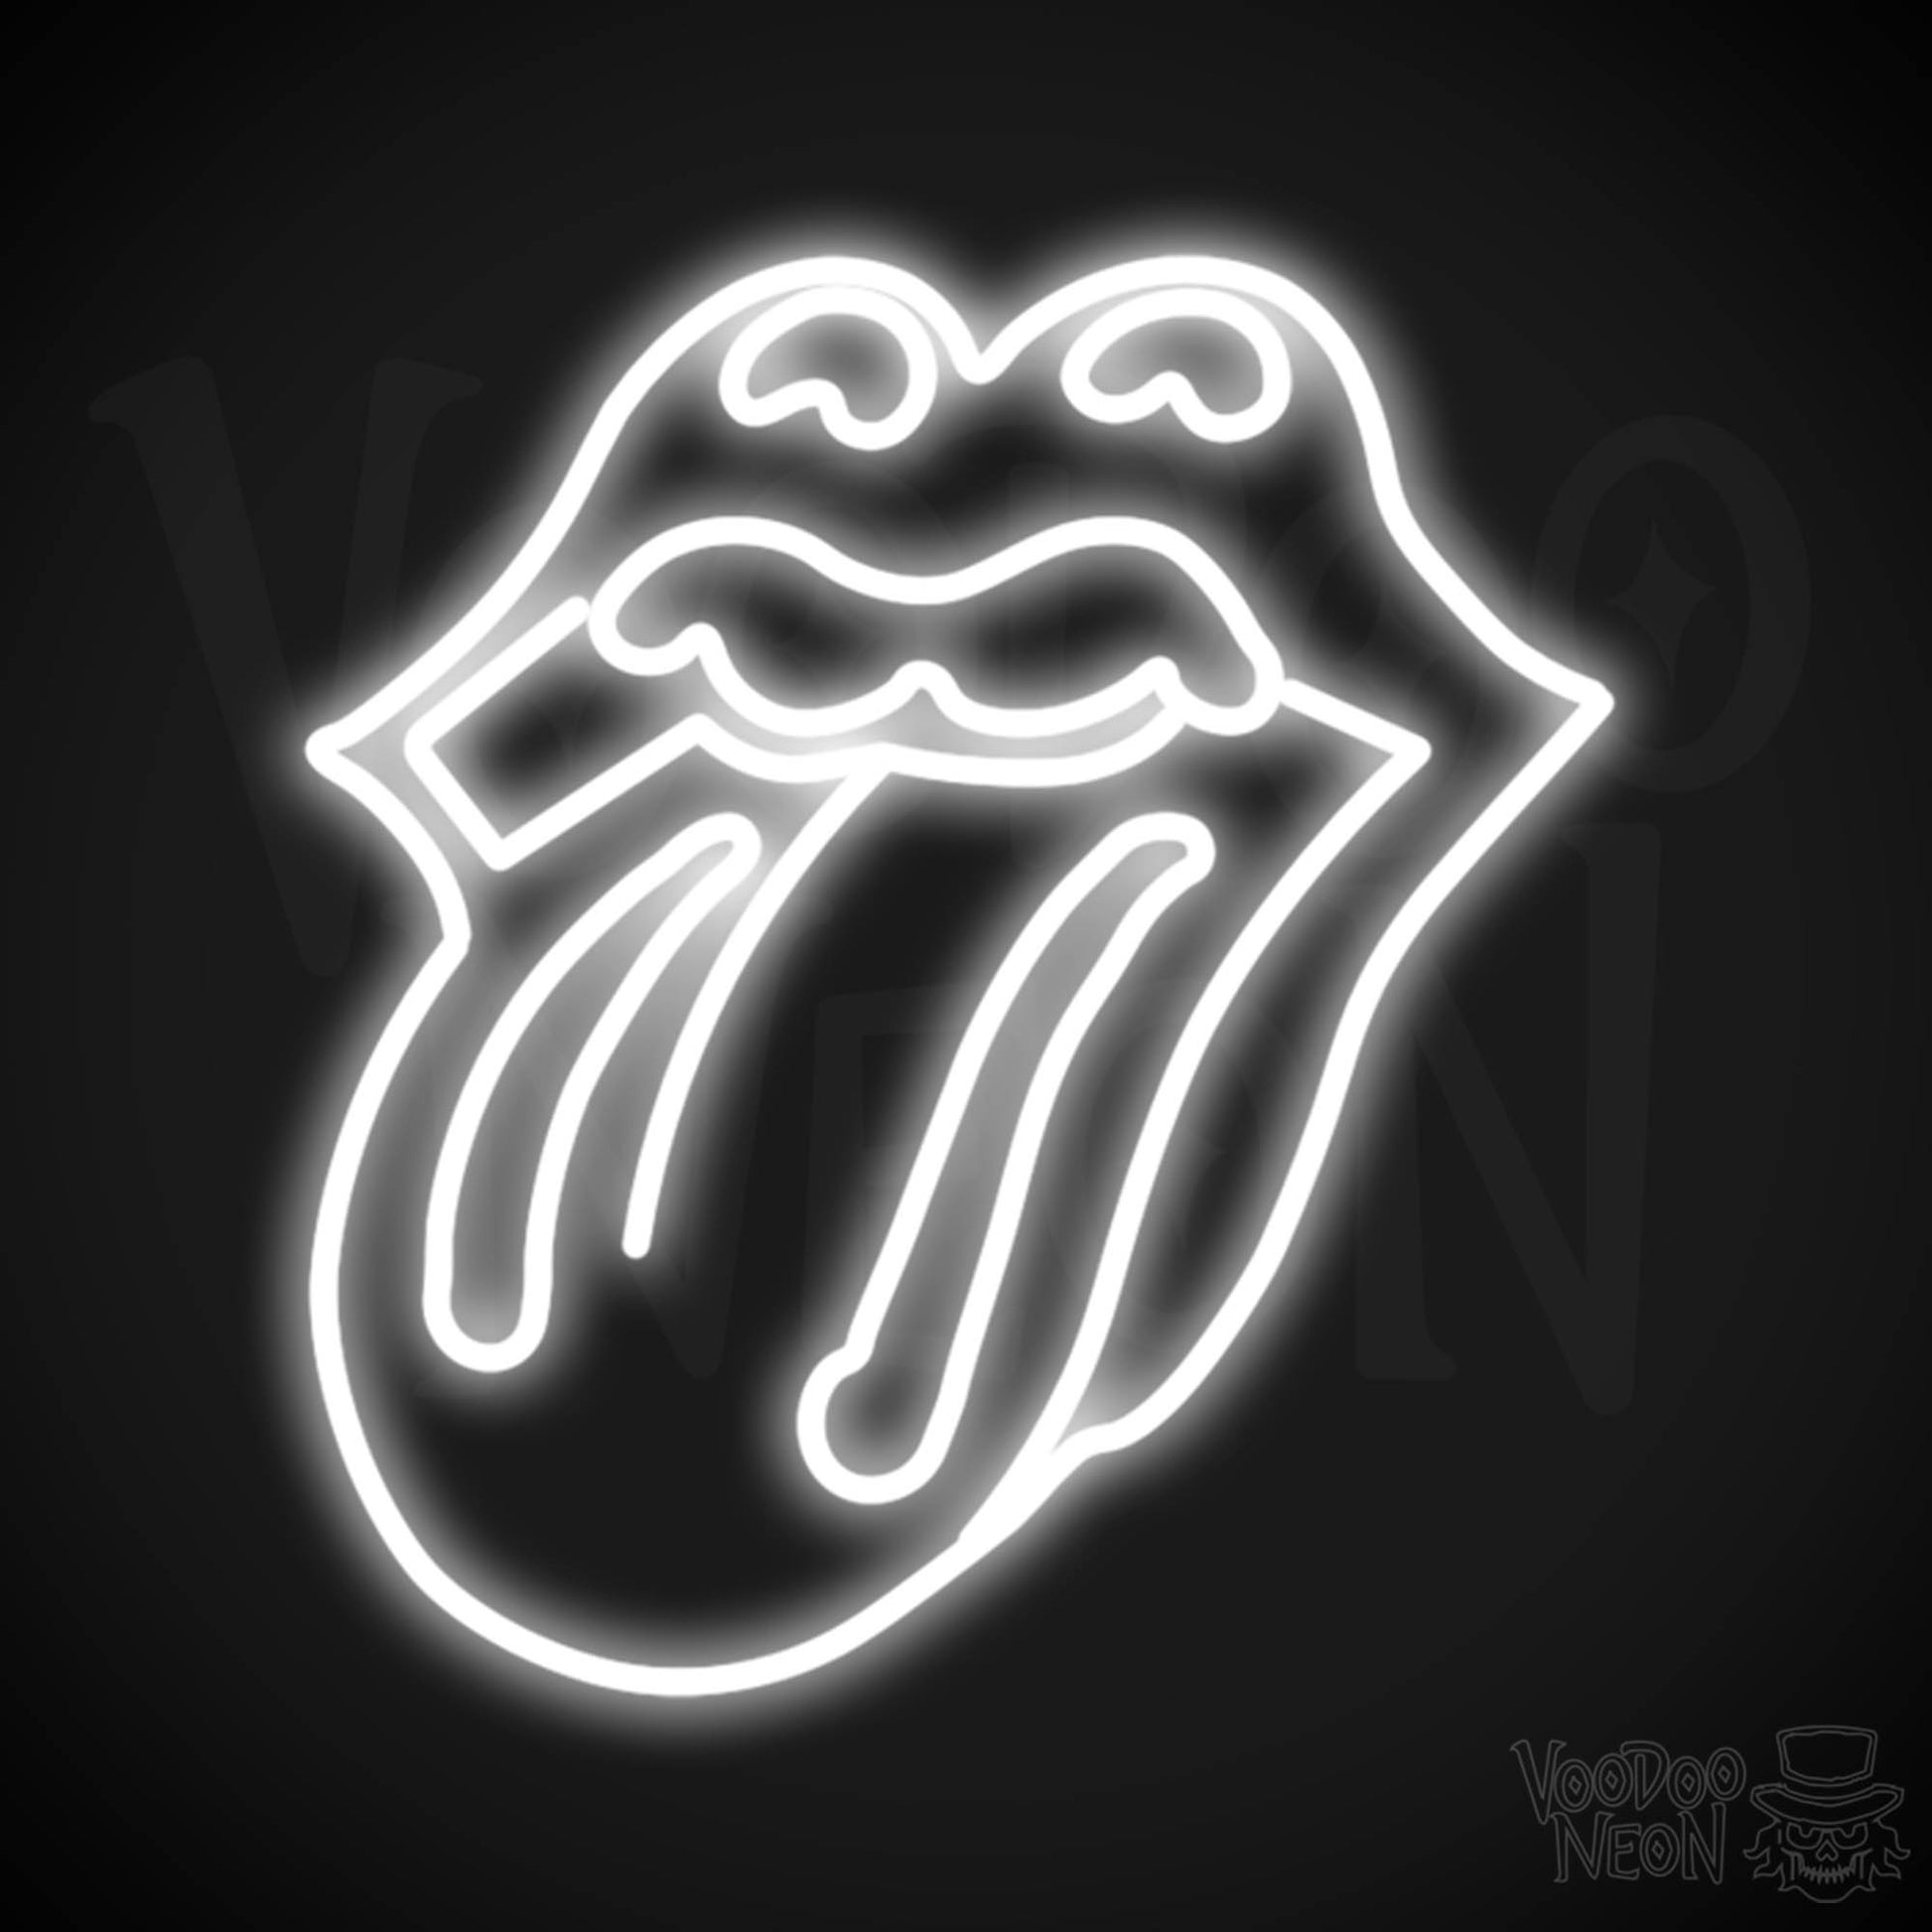 Rolling Stones Neon Sign - Rolling Stones Sign - Neon Rolling Stones Logo Wall Art - Color White